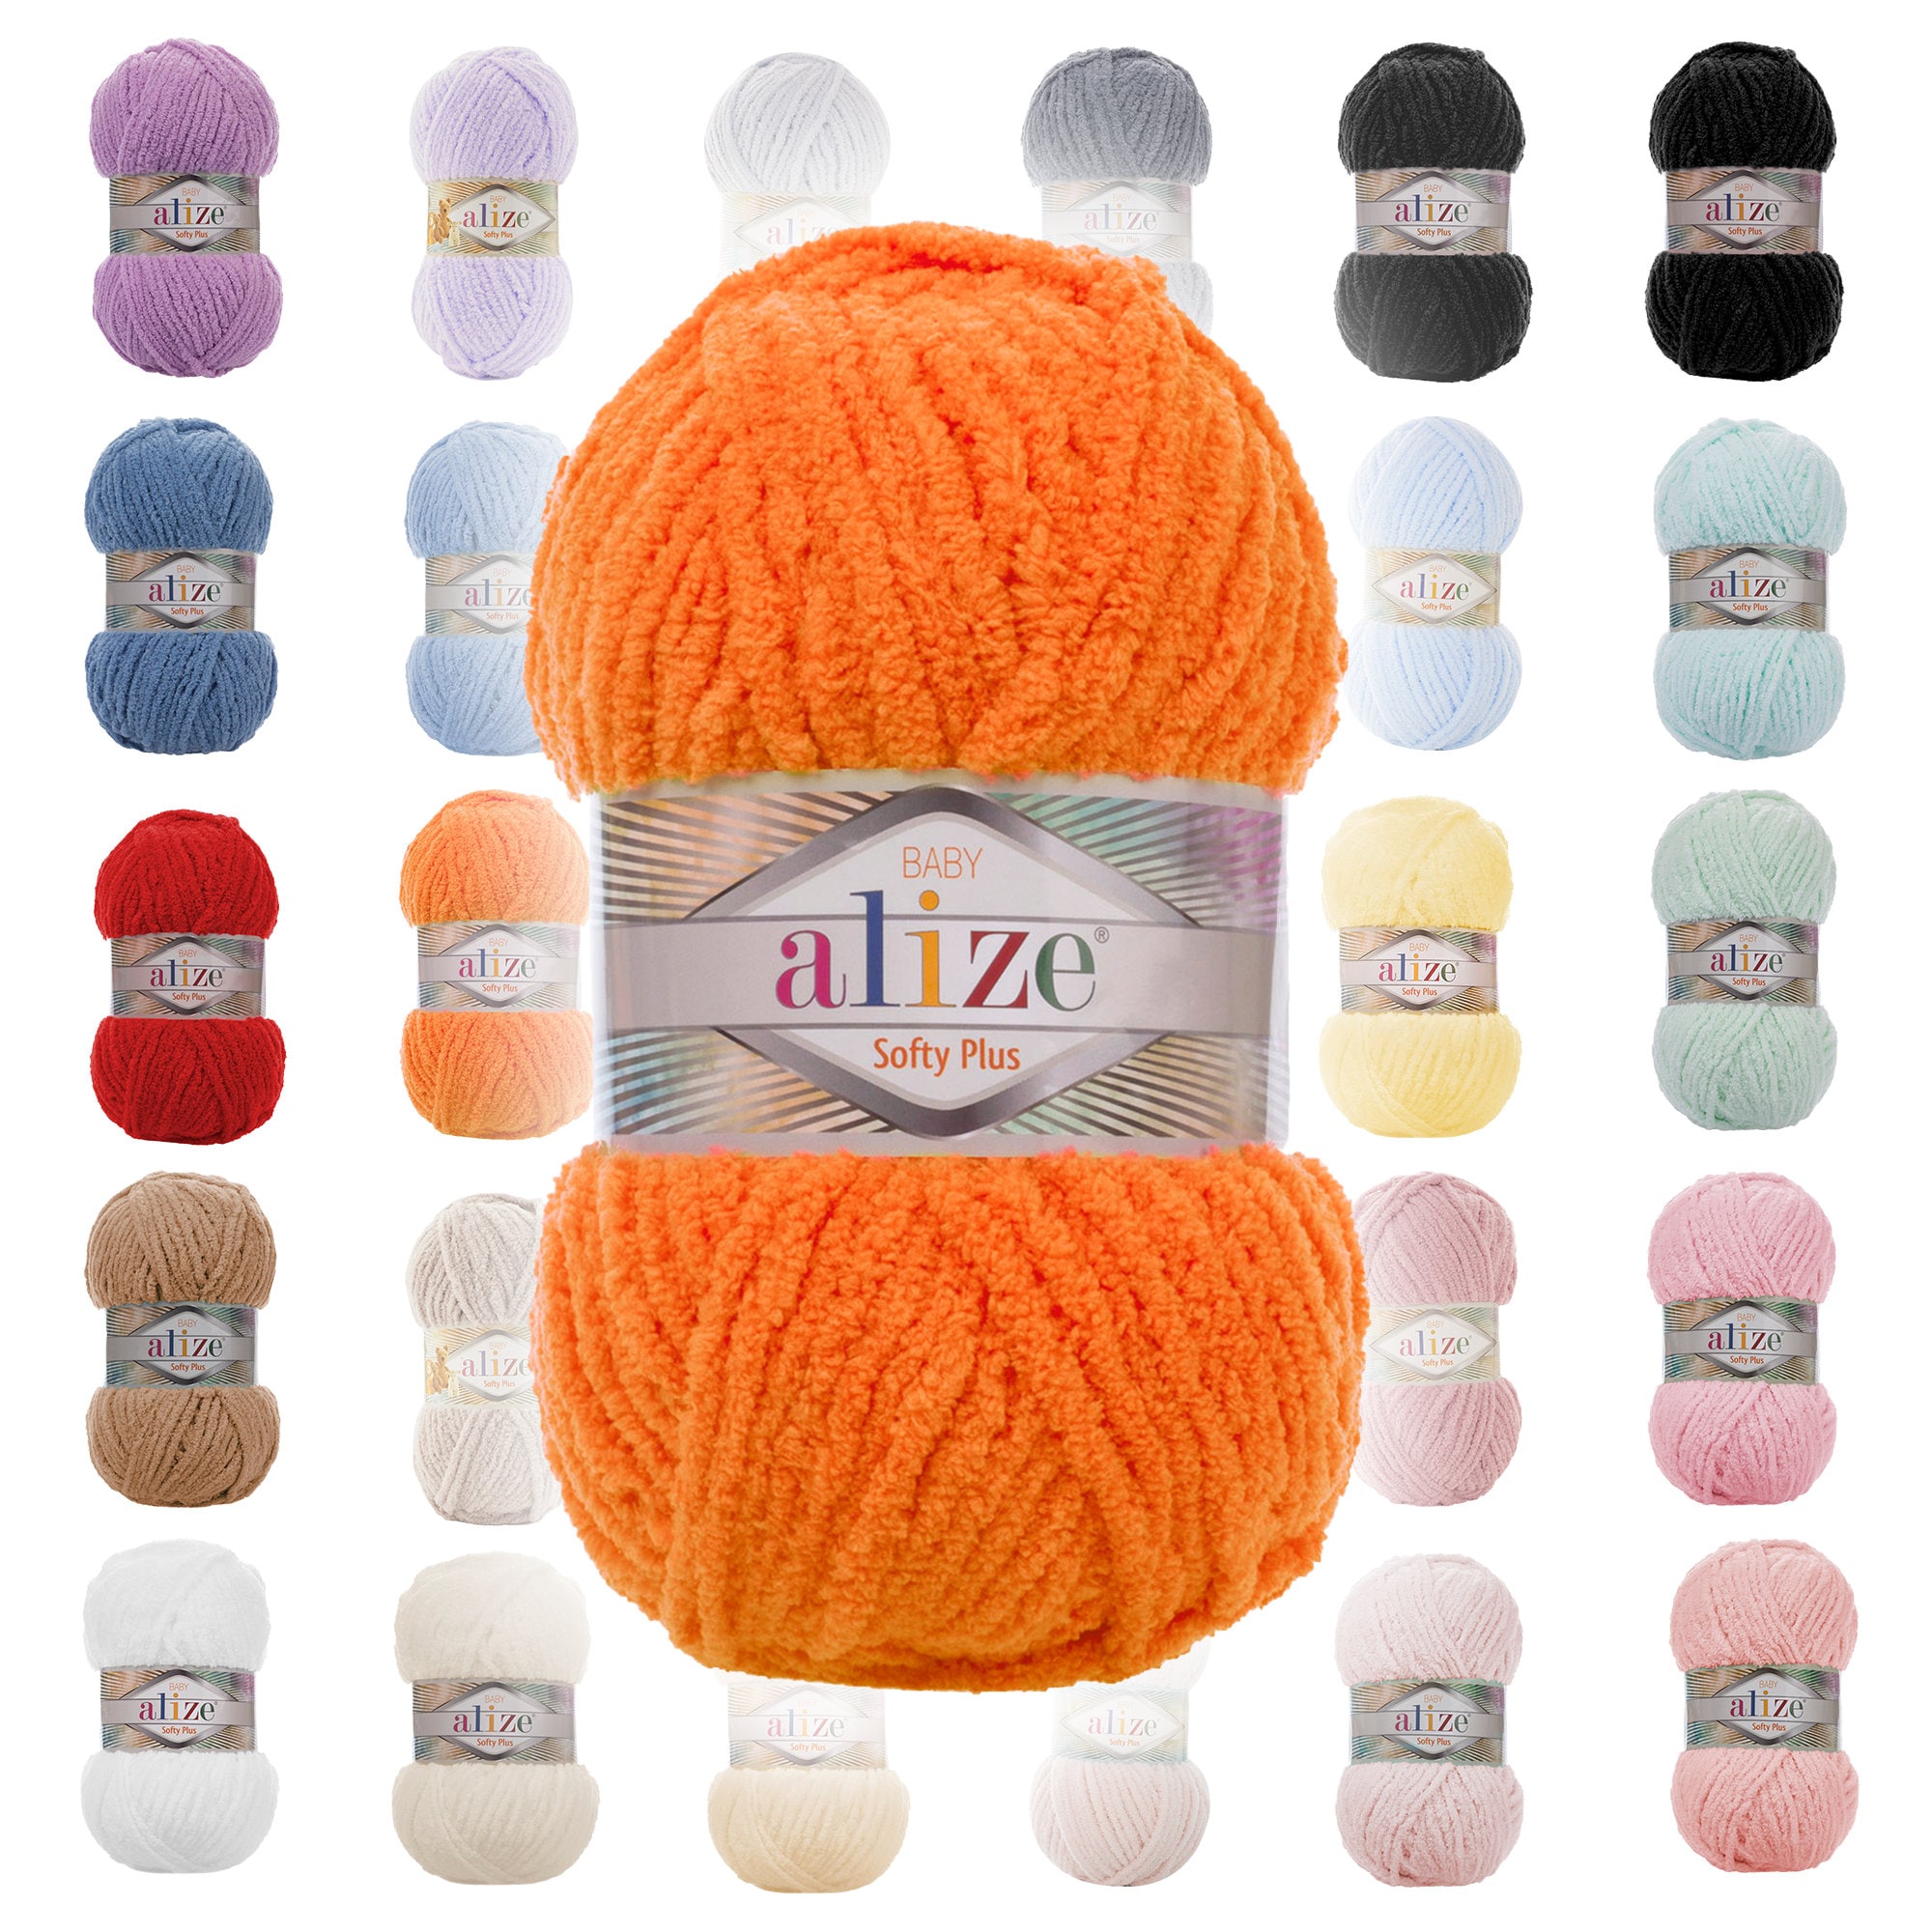 Alize Lanagold Classic, Knitting Yarn